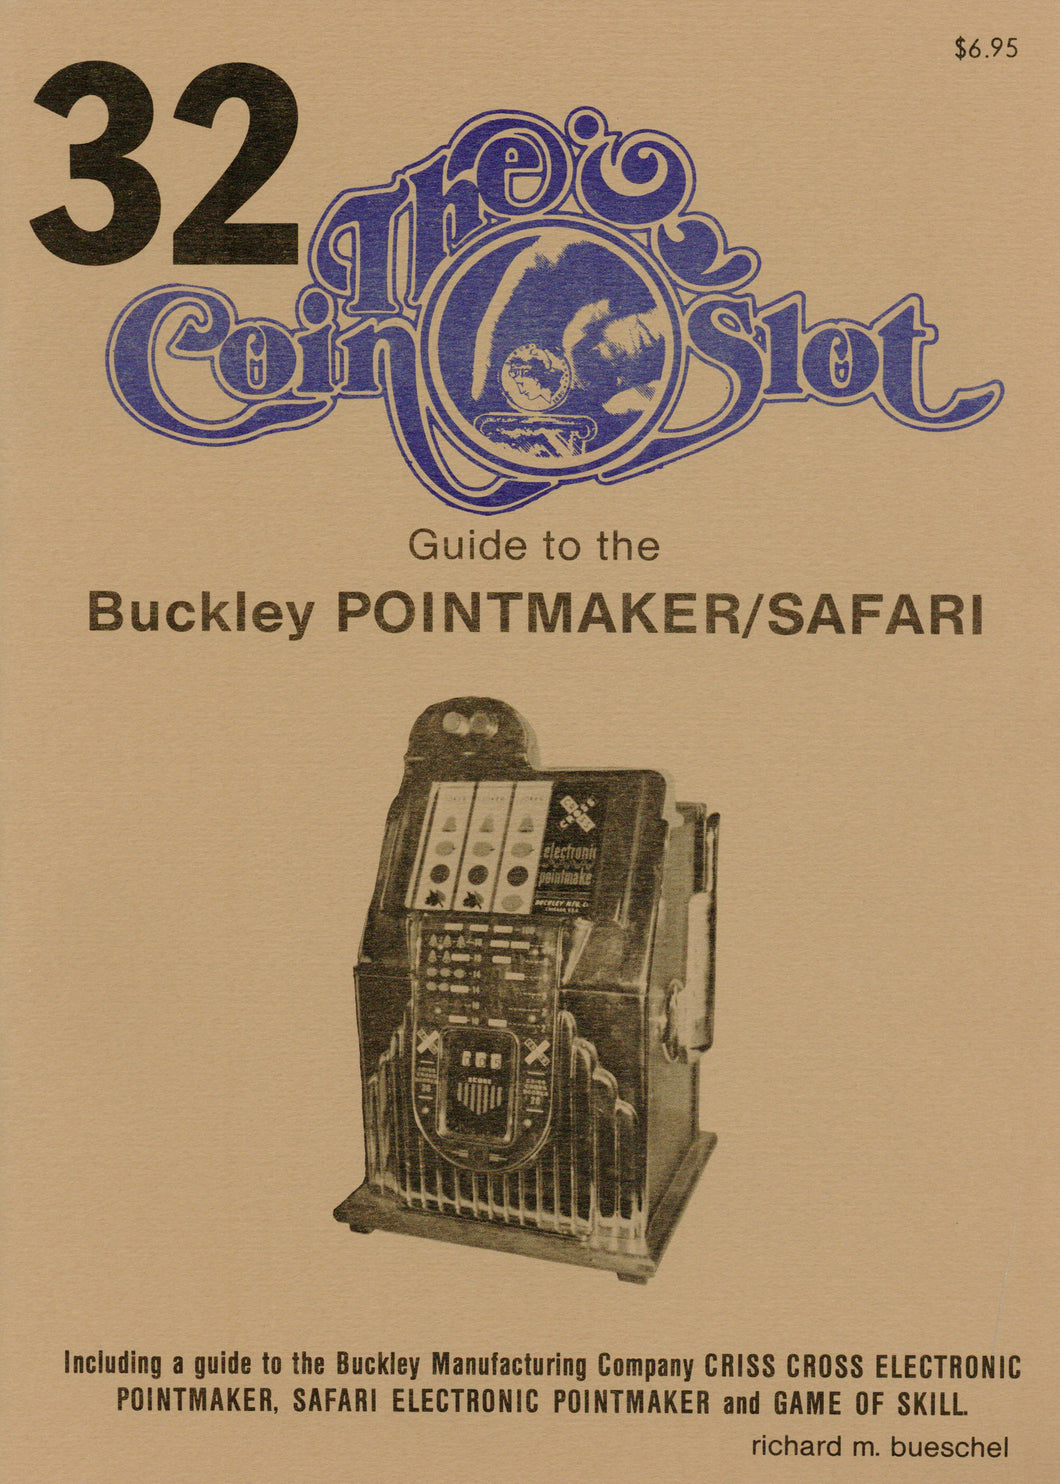 Coin Slot #32. Guide to the Buckley Pointmaker/Safari